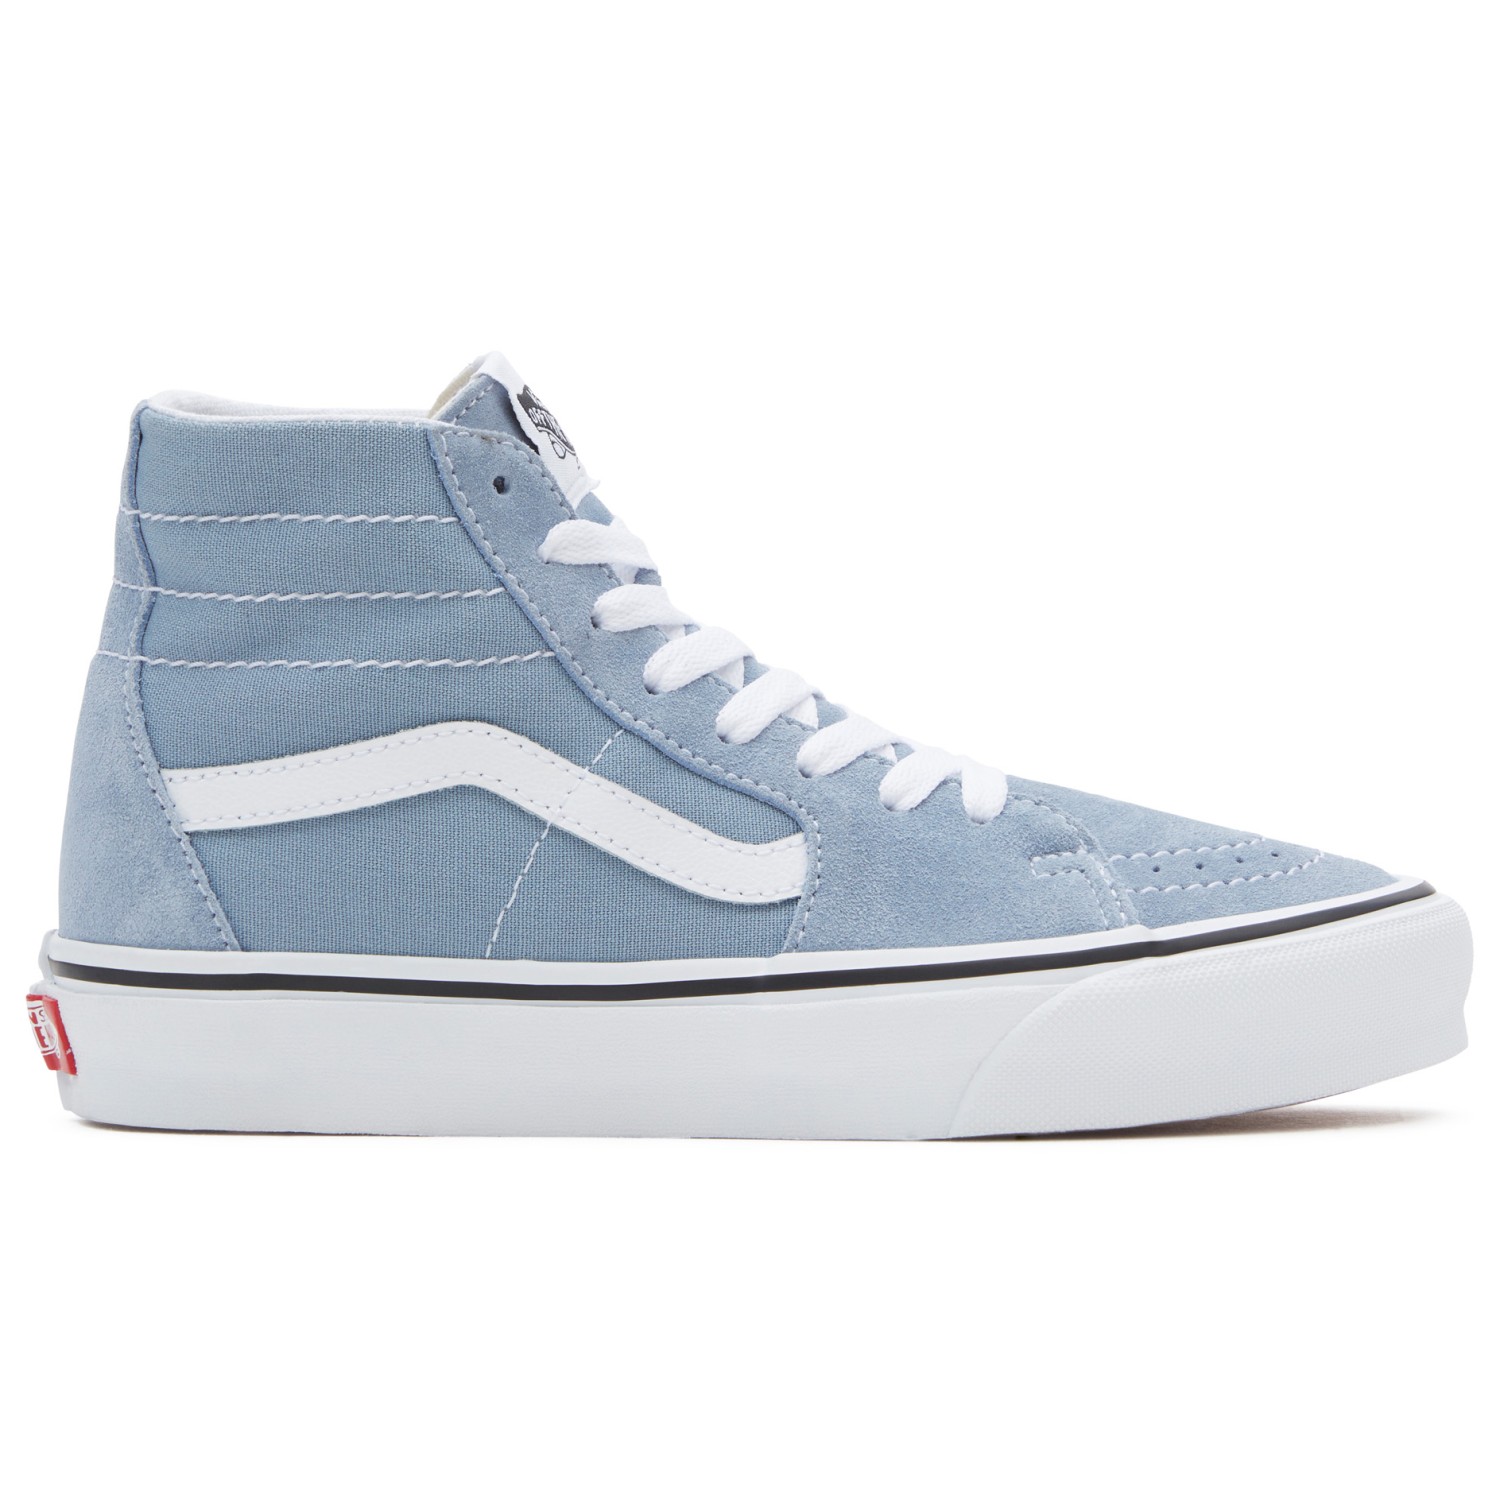 Кроссовки Vans Sk8 Hi Tapered, цвет Color Theory Dusty Blue